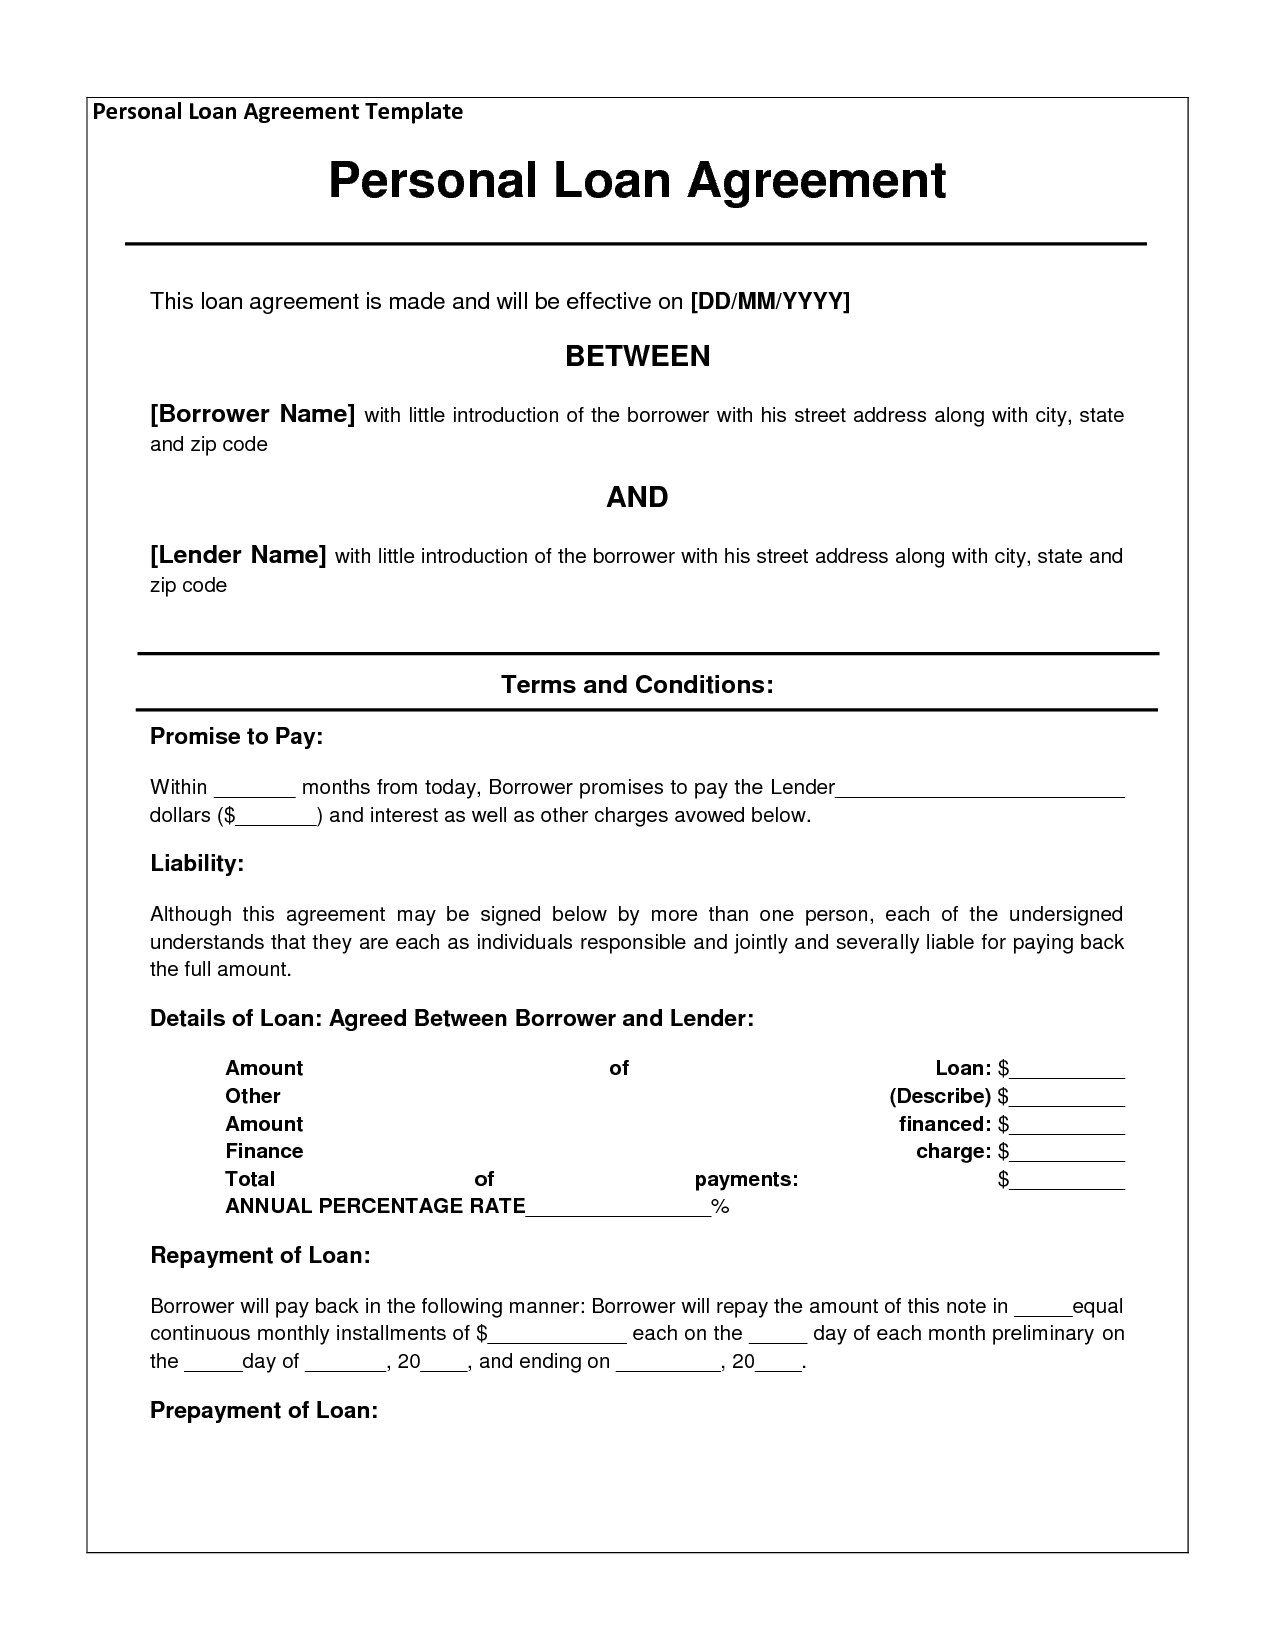 Free Personal Loan Agreement Form Template - $1000 Approved In 2 - Free Printable Promissory Note For Personal Loan